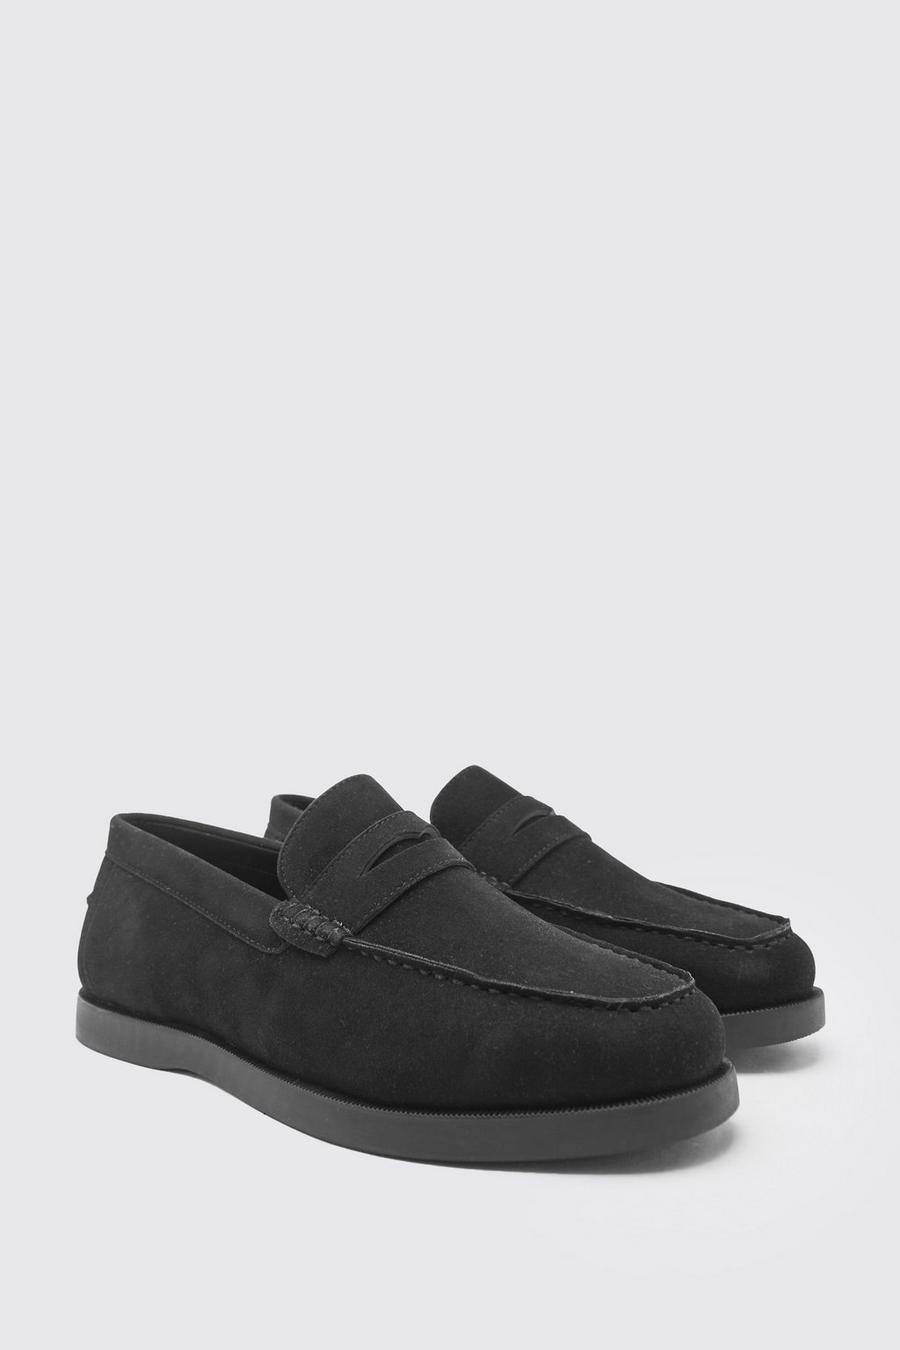 Black negro Gum Faux Suede Penny Loafer